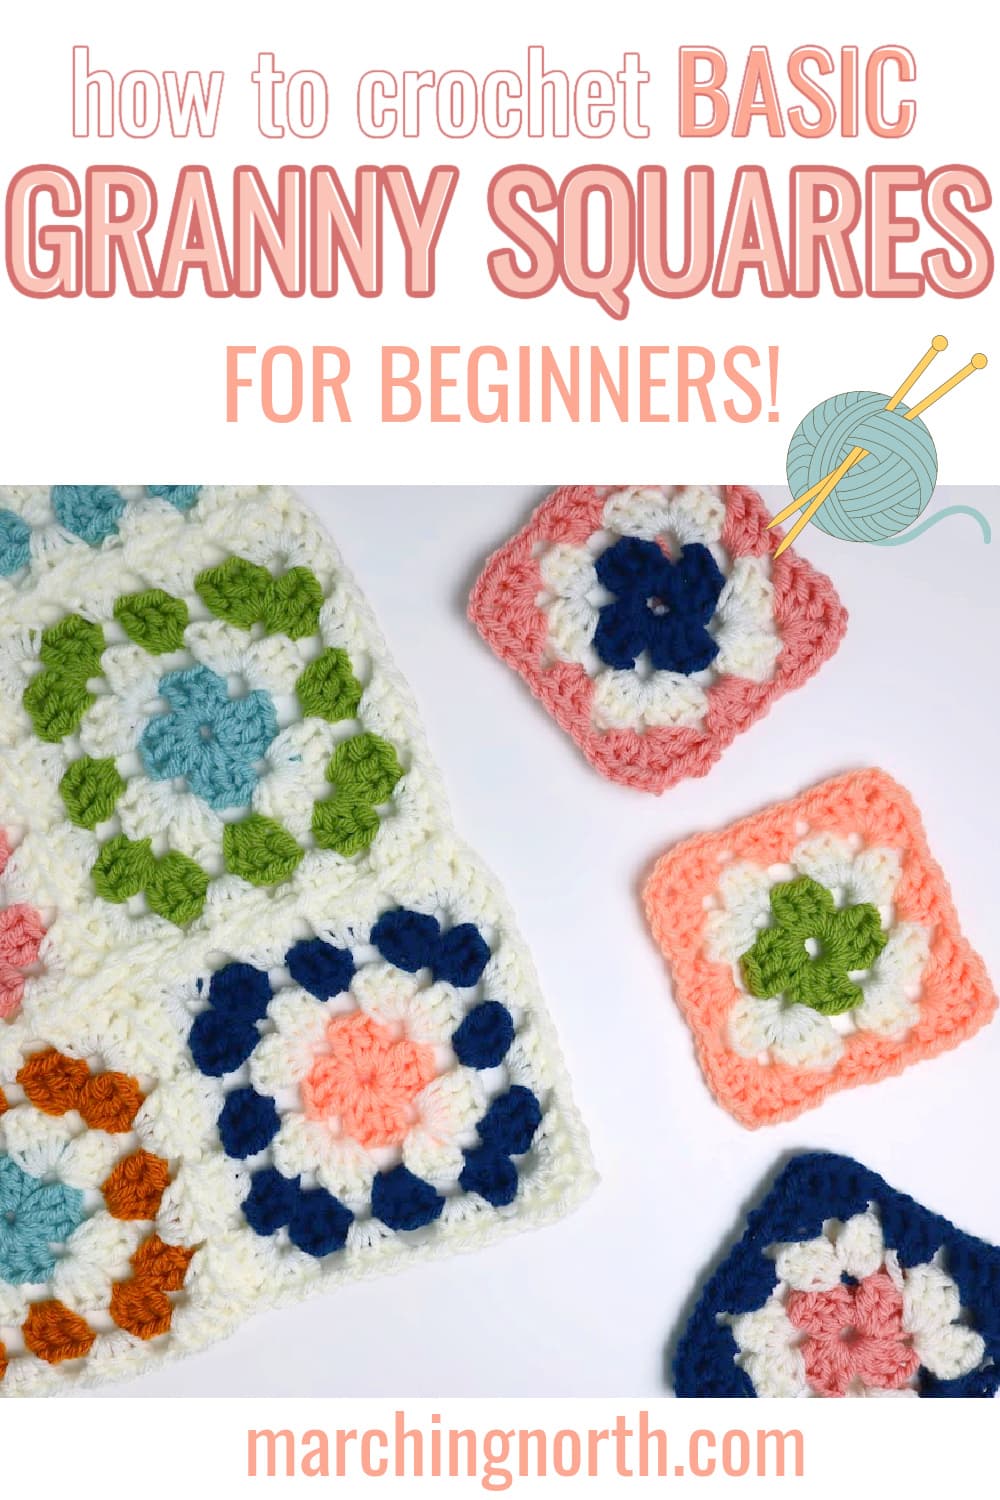 How to Crochet a Classic Granny Square for Beginners (Step by Step